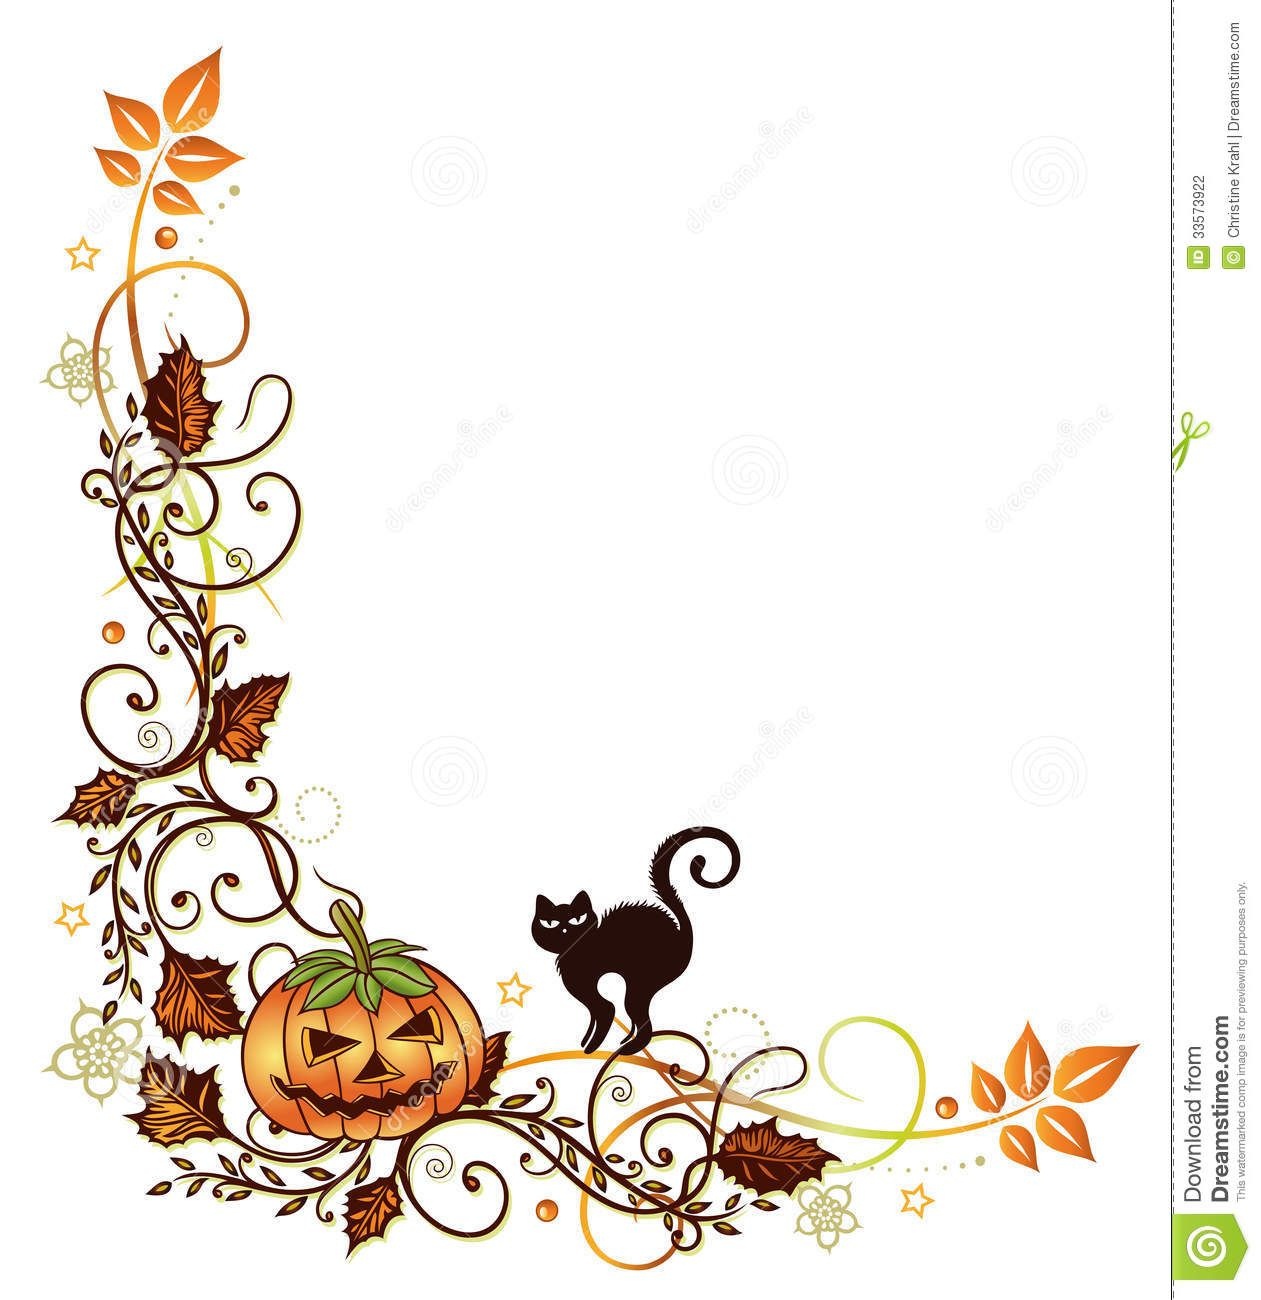 Halloween Border Clipart - Free Large Images | Halloween In 2019 - Free Printable Halloween Stationery Borders